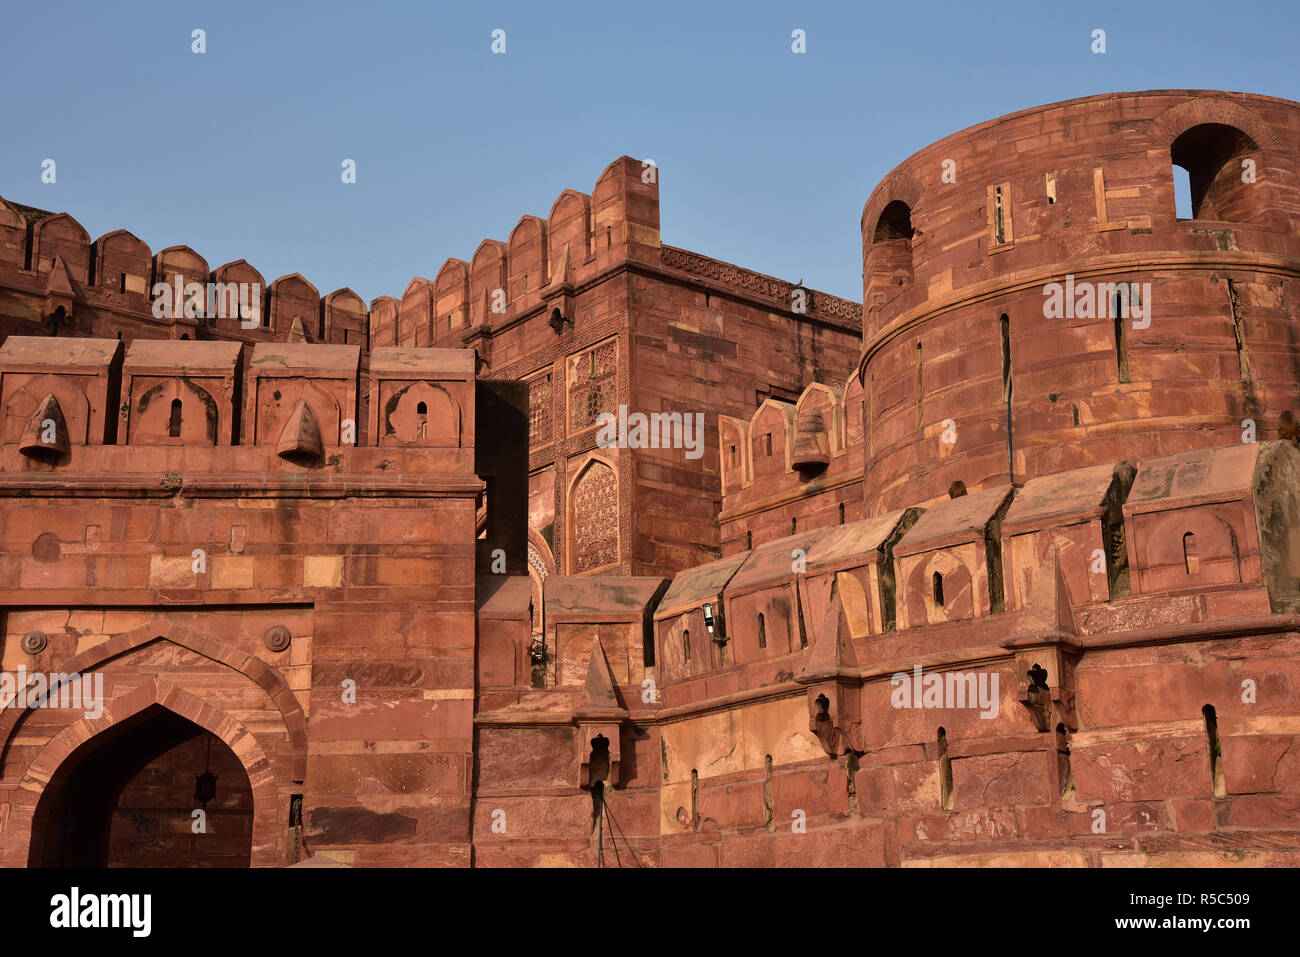 The imposing red sandstone ramparts of Amar Singh Gate, Agra Fort. Built by Emperor Akbar between 1565 and 1573. Agra, Central India, Asia. Stock Photo